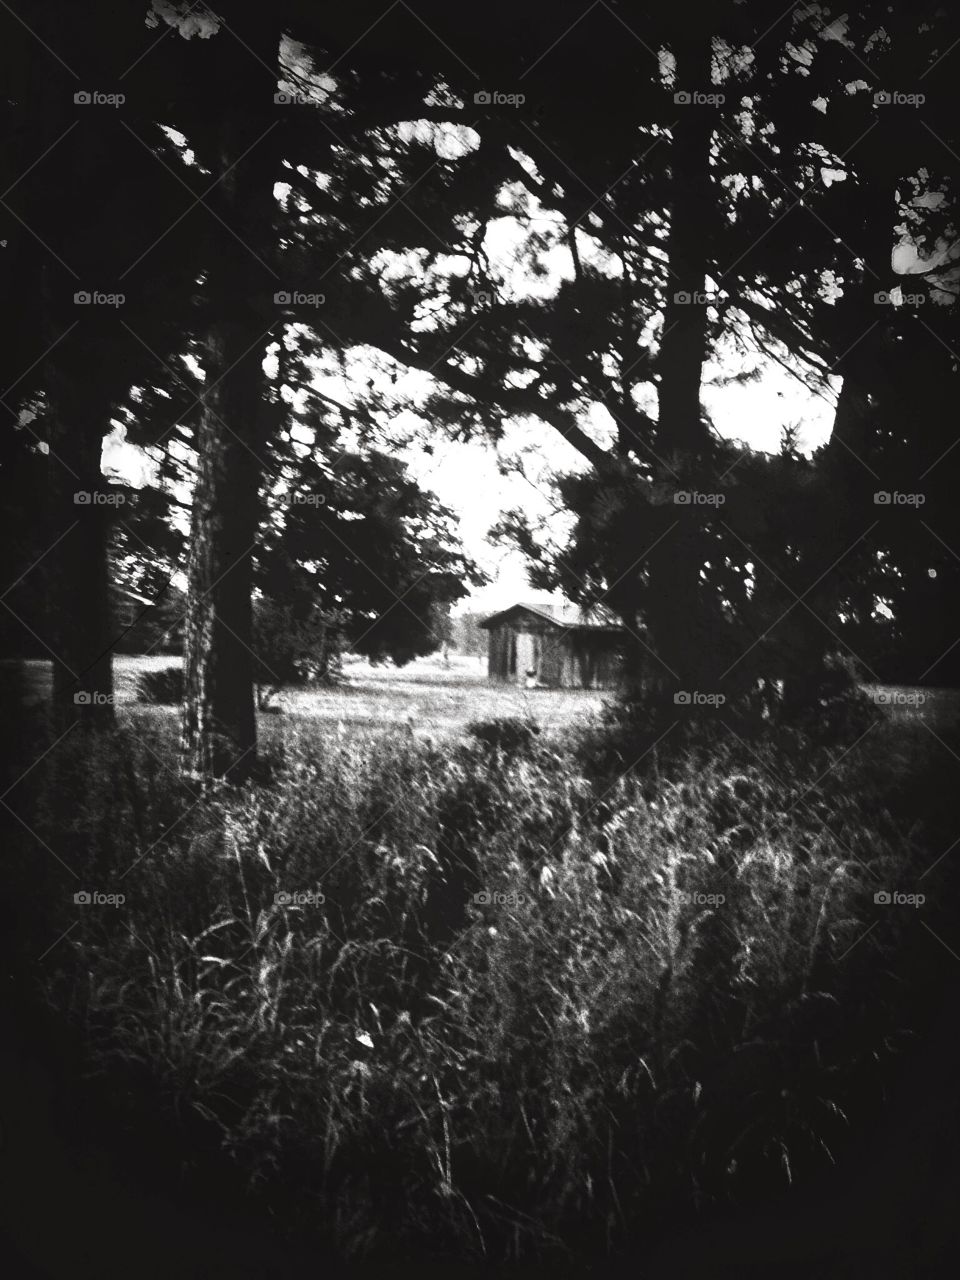 A B&W abstract photo of an old barn or farm house in rural White County, central Arkansas